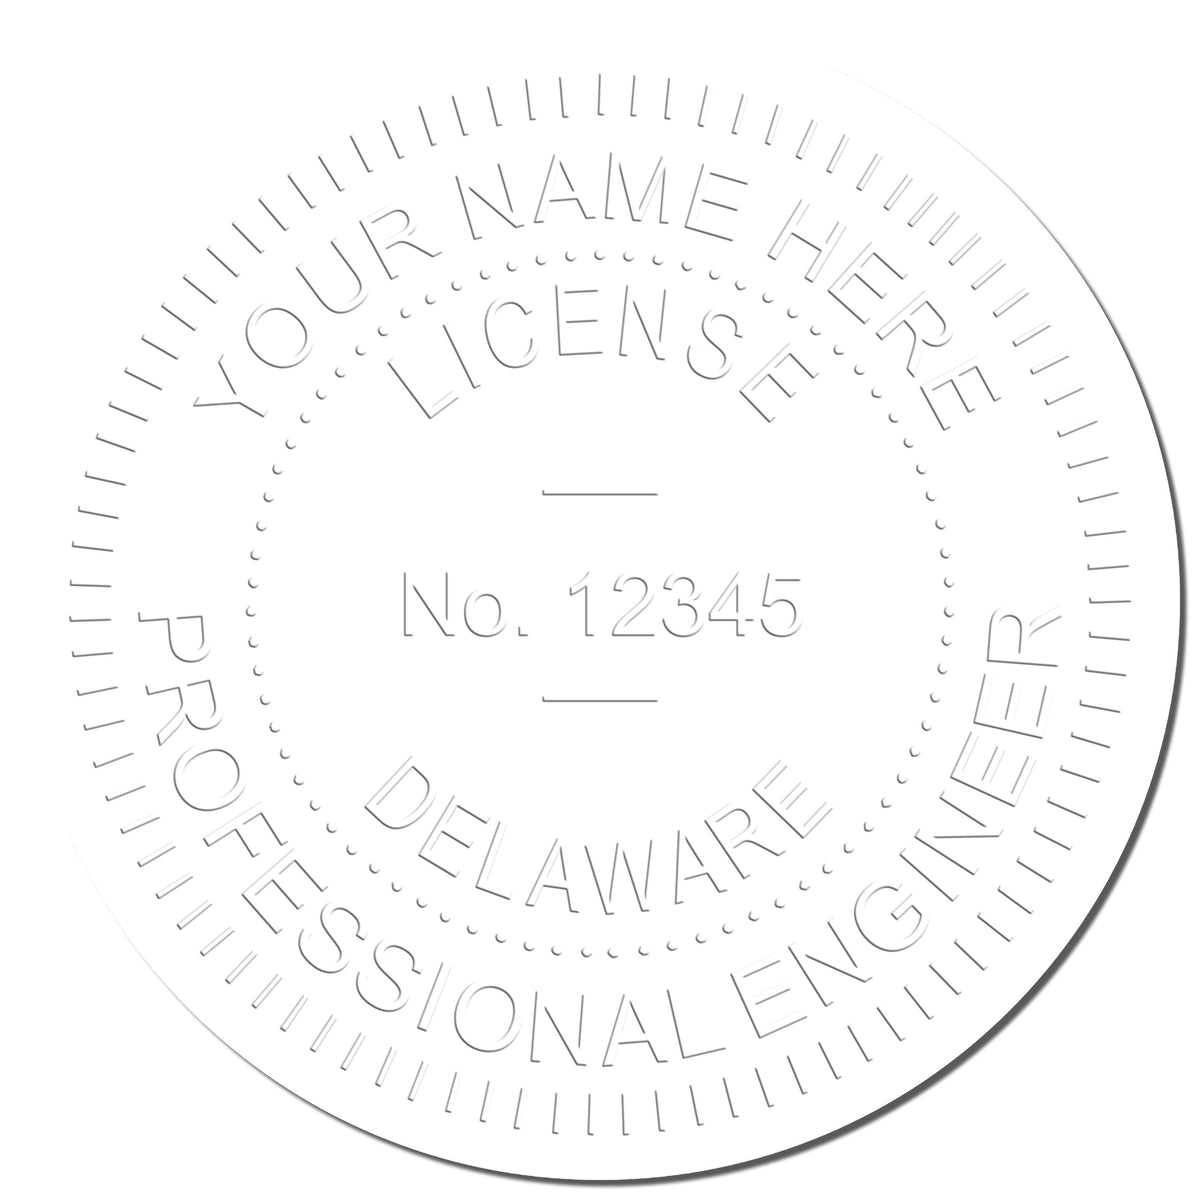 This paper is stamped with a sample imprint of the Heavy Duty Cast Iron Delaware Engineer Seal Embosser, signifying its quality and reliability.